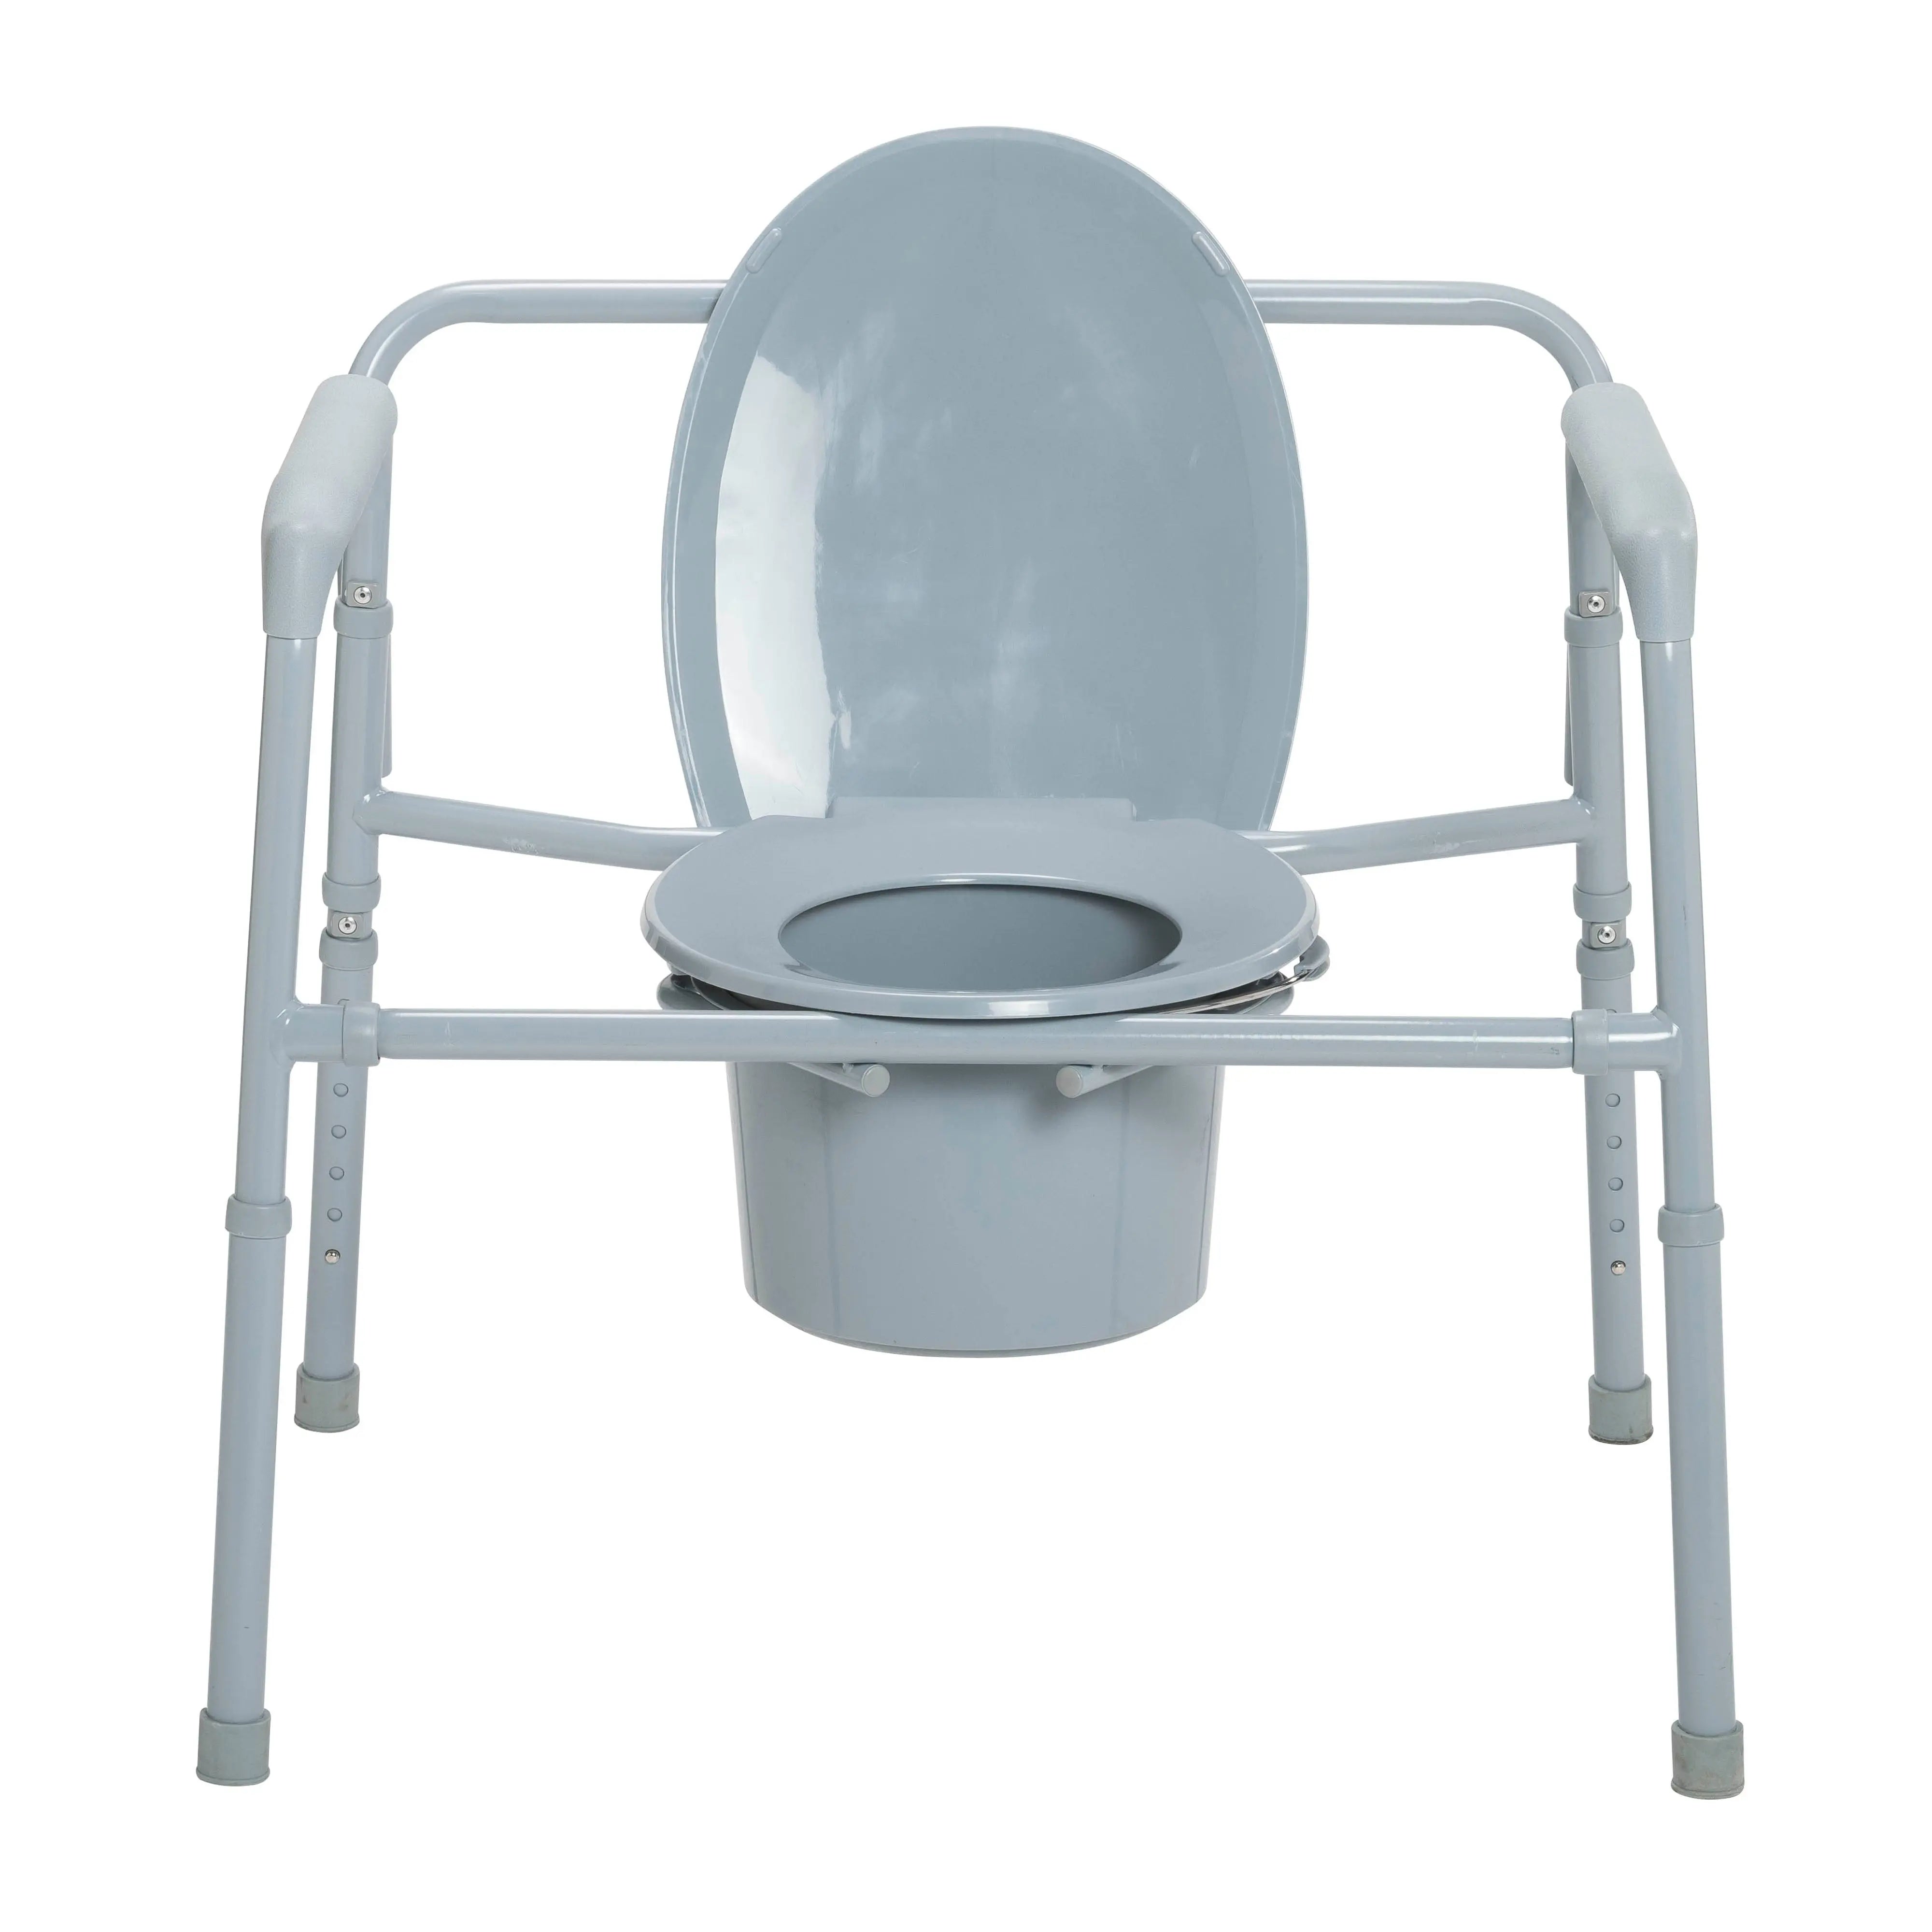 Heavy Duty Bariatric Folding Bedside Commode Seat - Home Health Store Inc